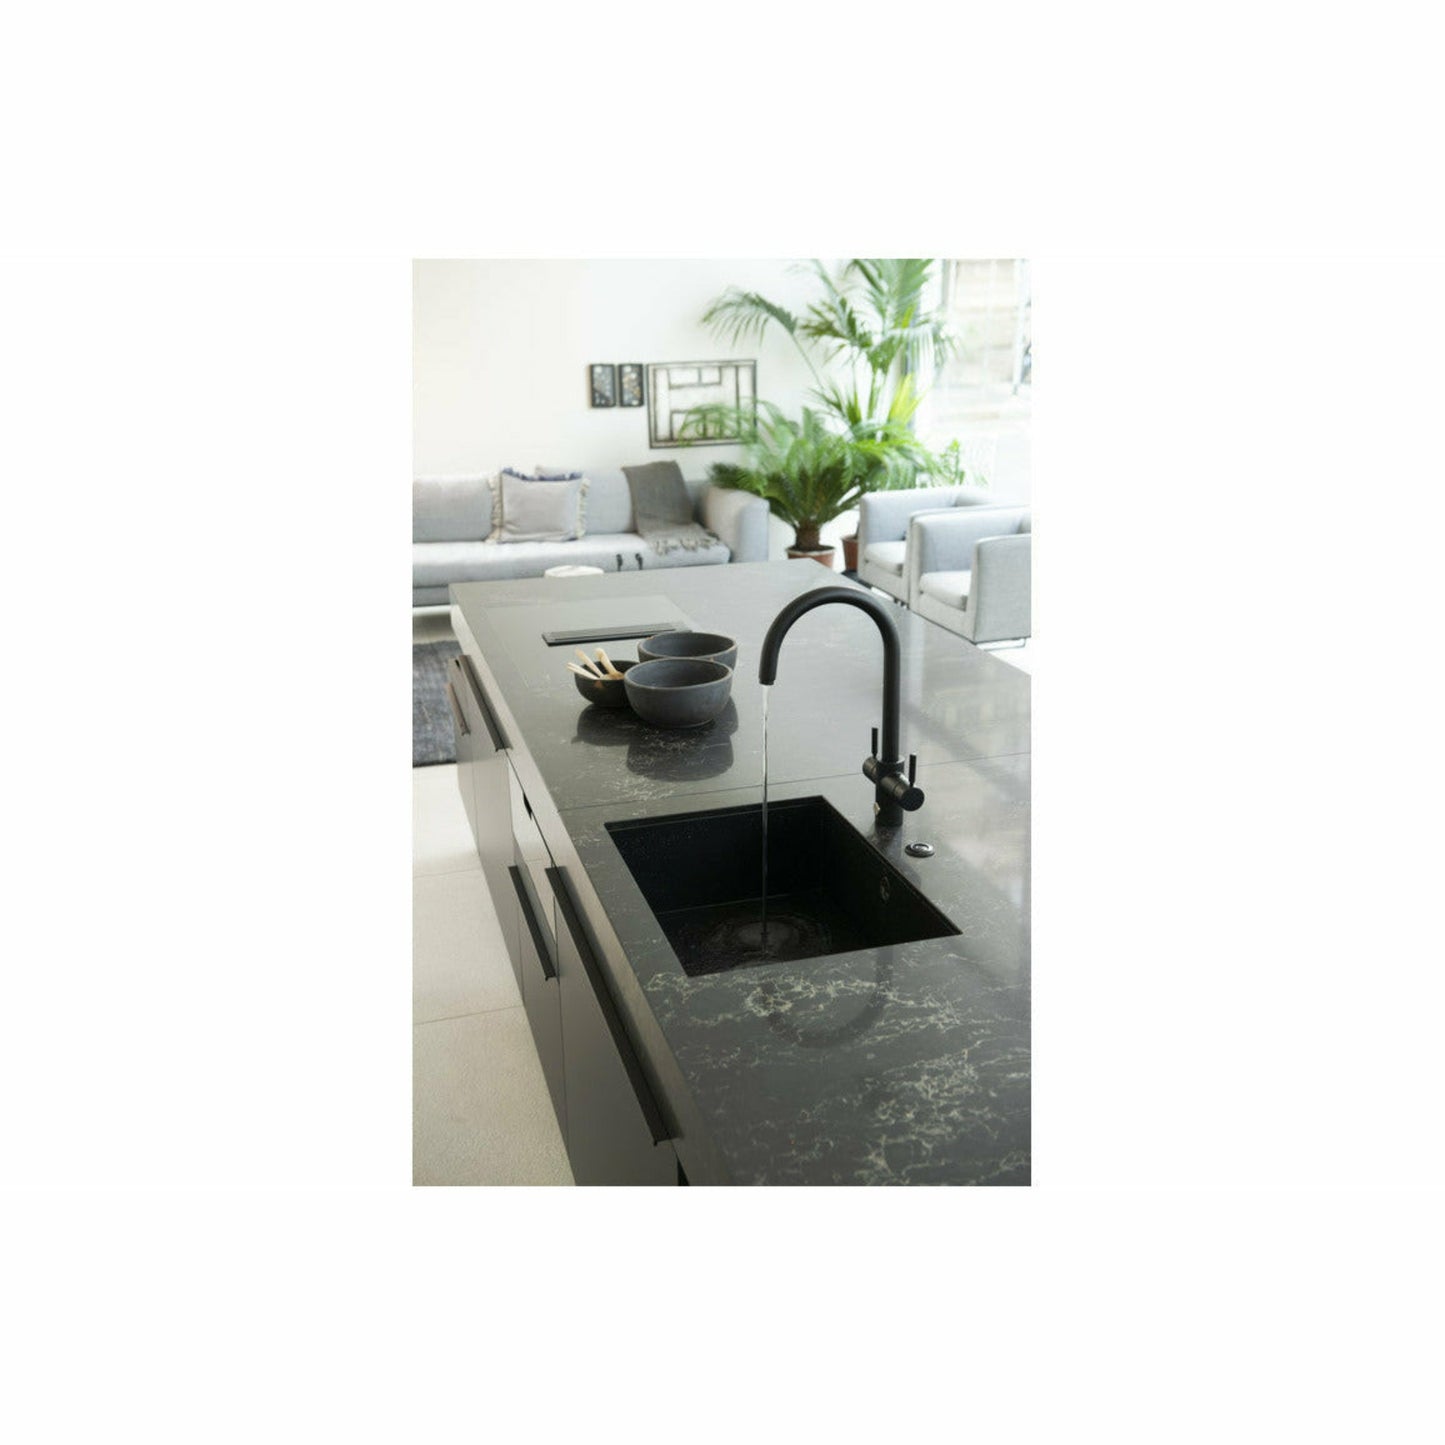 InSinkErator 4 in 1 Touch Boiling Water Tap J Shape Spout -Black Velvet -Lifestyle image in all black marble kitchen The Tap Specialist